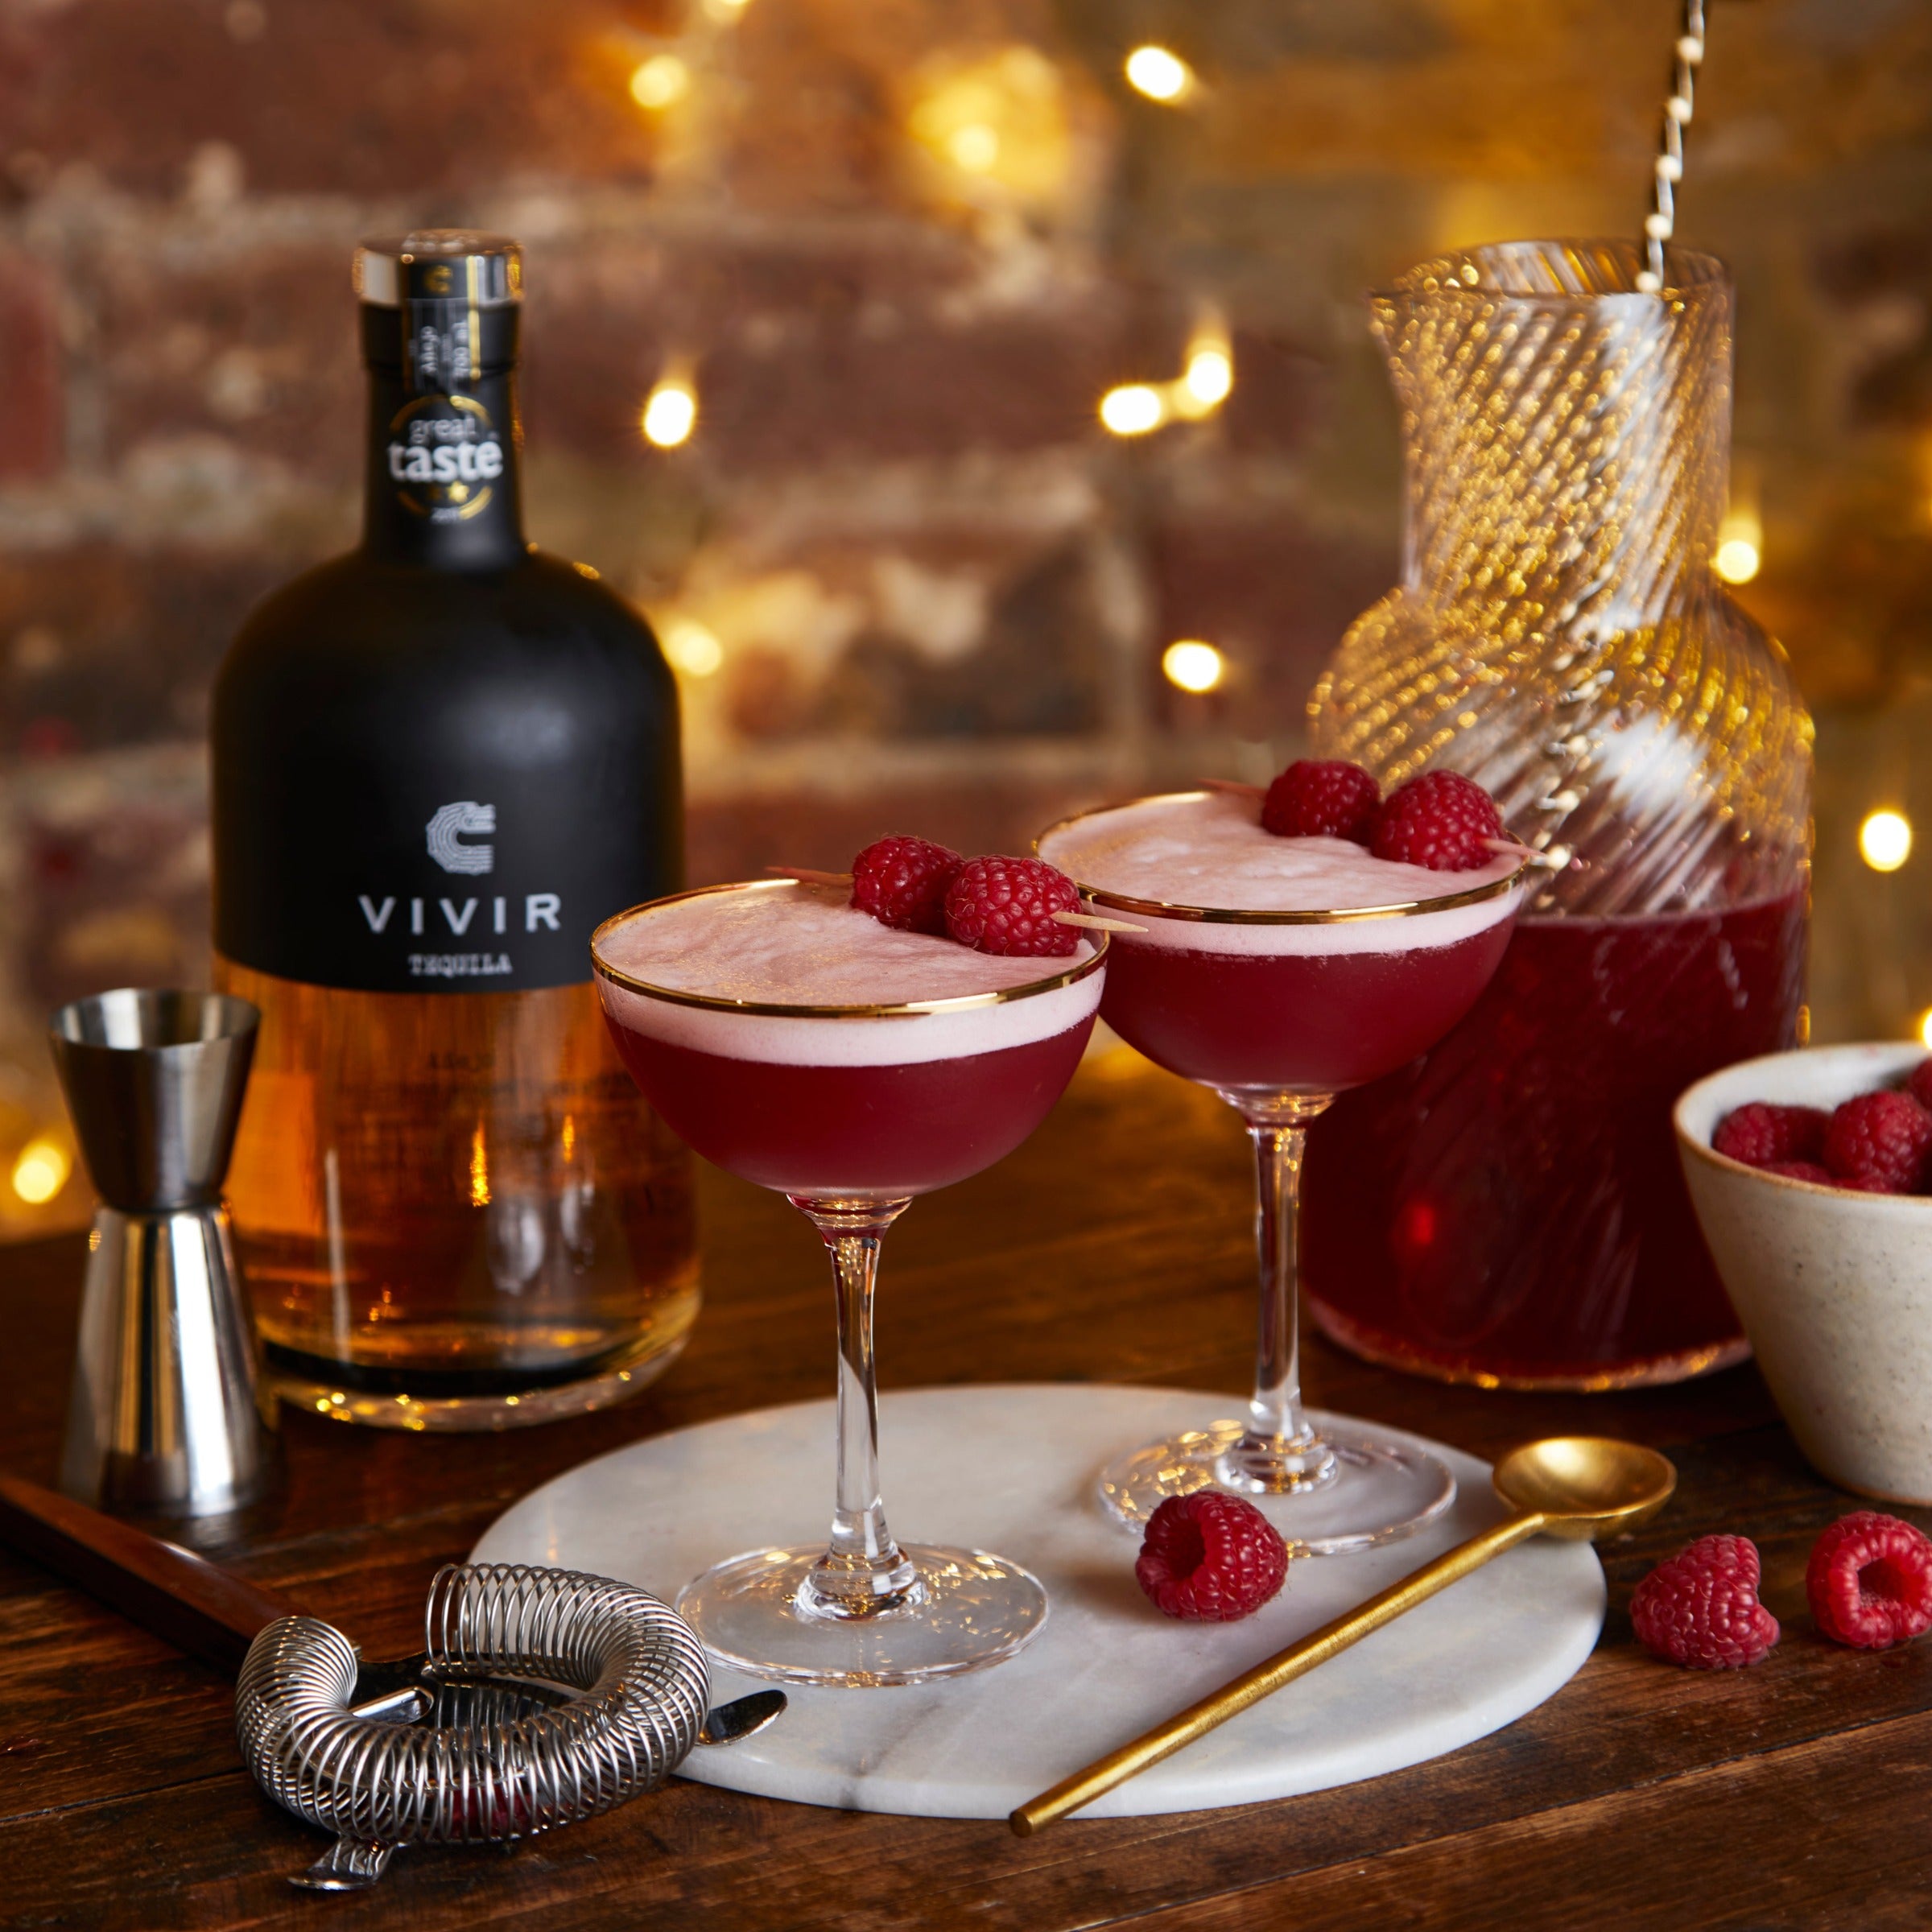 A bottle of VIVIR Tequila Añejo stands next to two rapsberry cocktails in martini glasses and a carafe containing the crimson cocktail, and surrounded by fresh raspberries and cocktail making equipment.